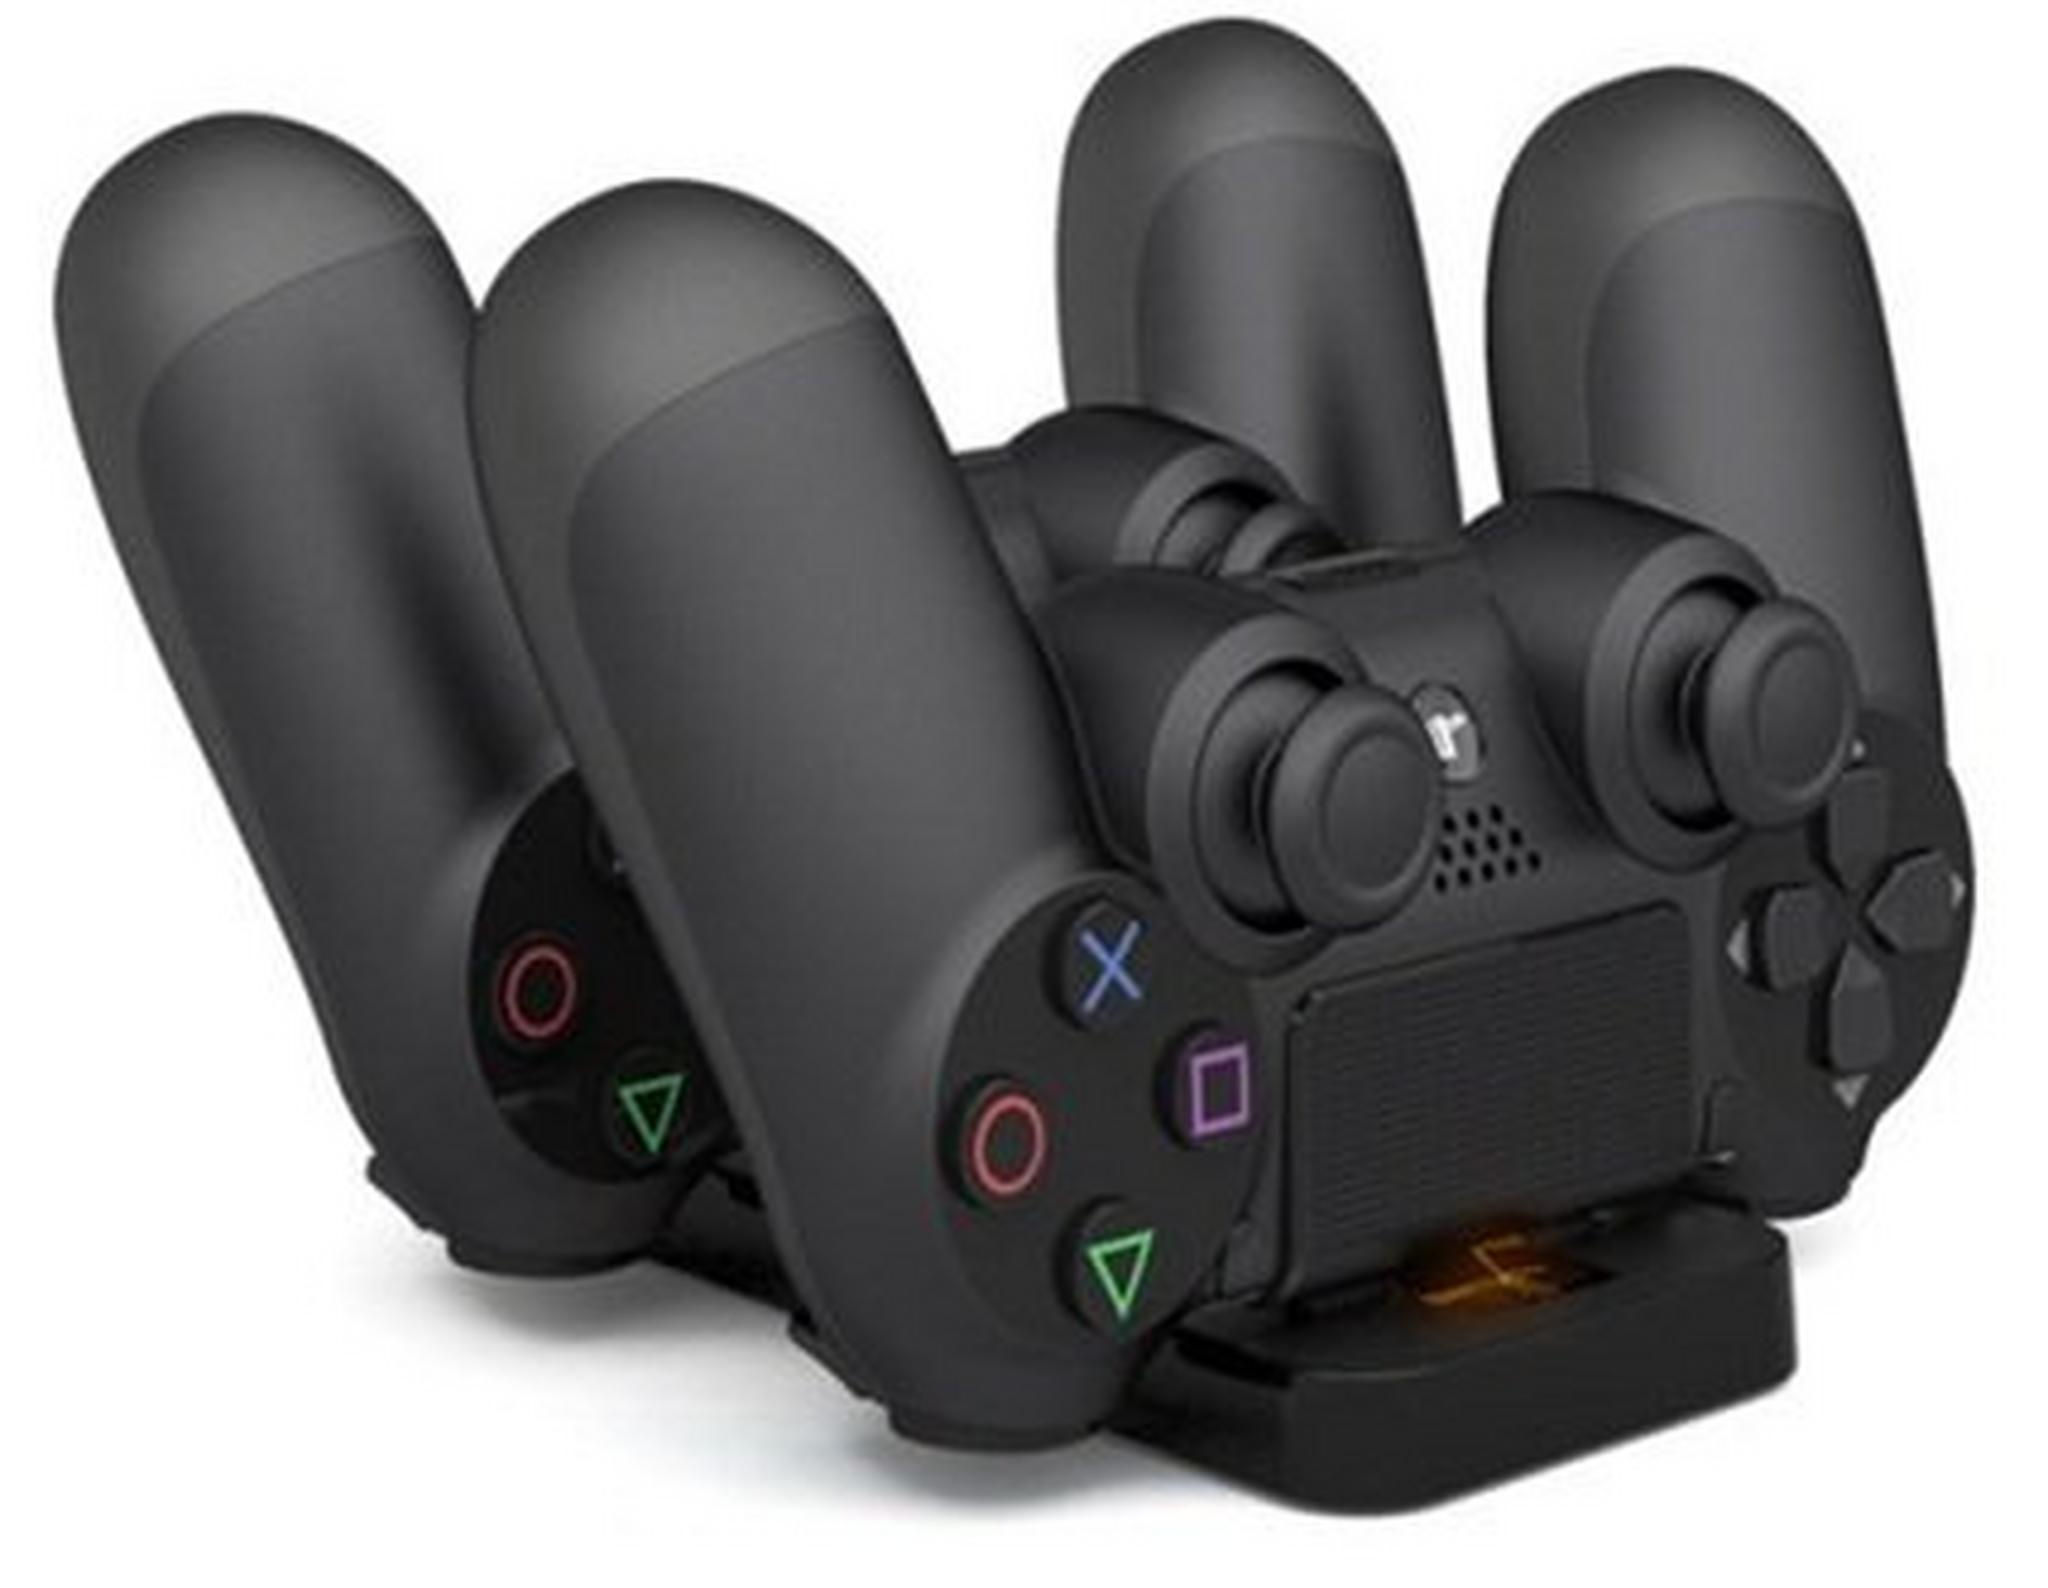 Dual Charging Dock for PlayStation 4